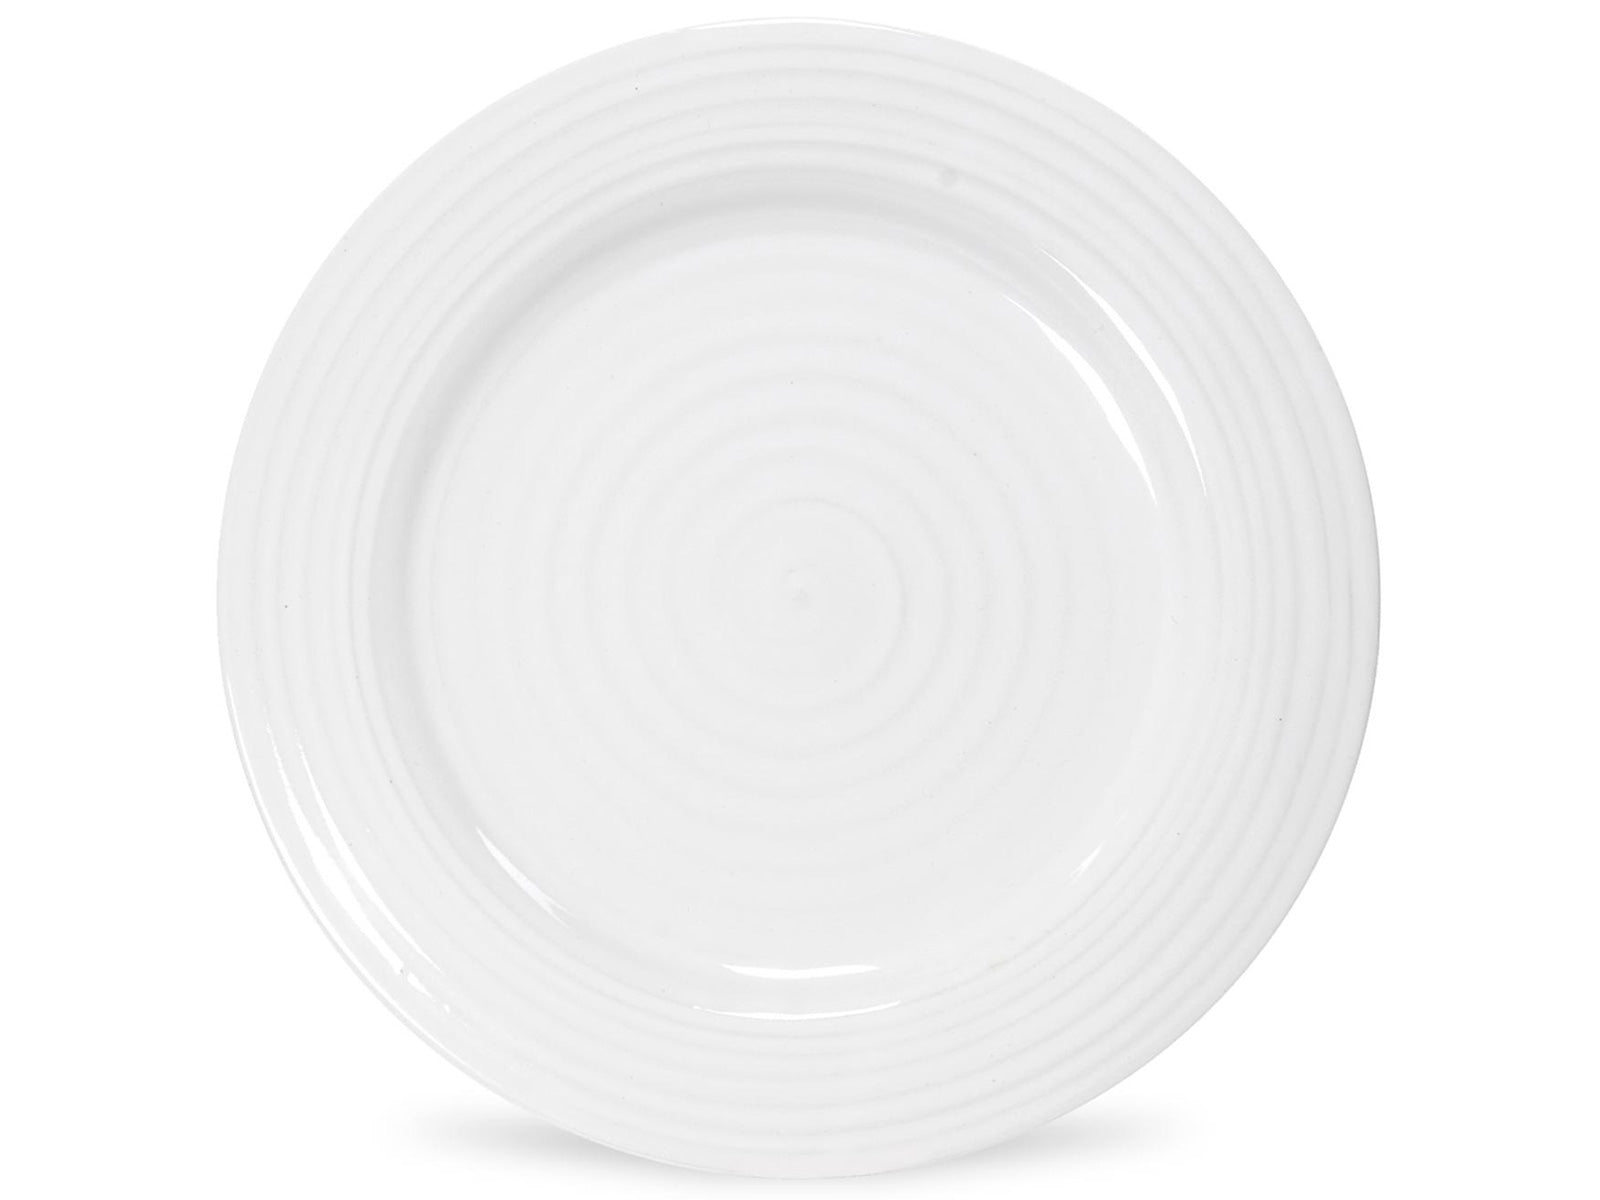 A large white plate with a spiral ripple emanating from the centre onto the wide rim